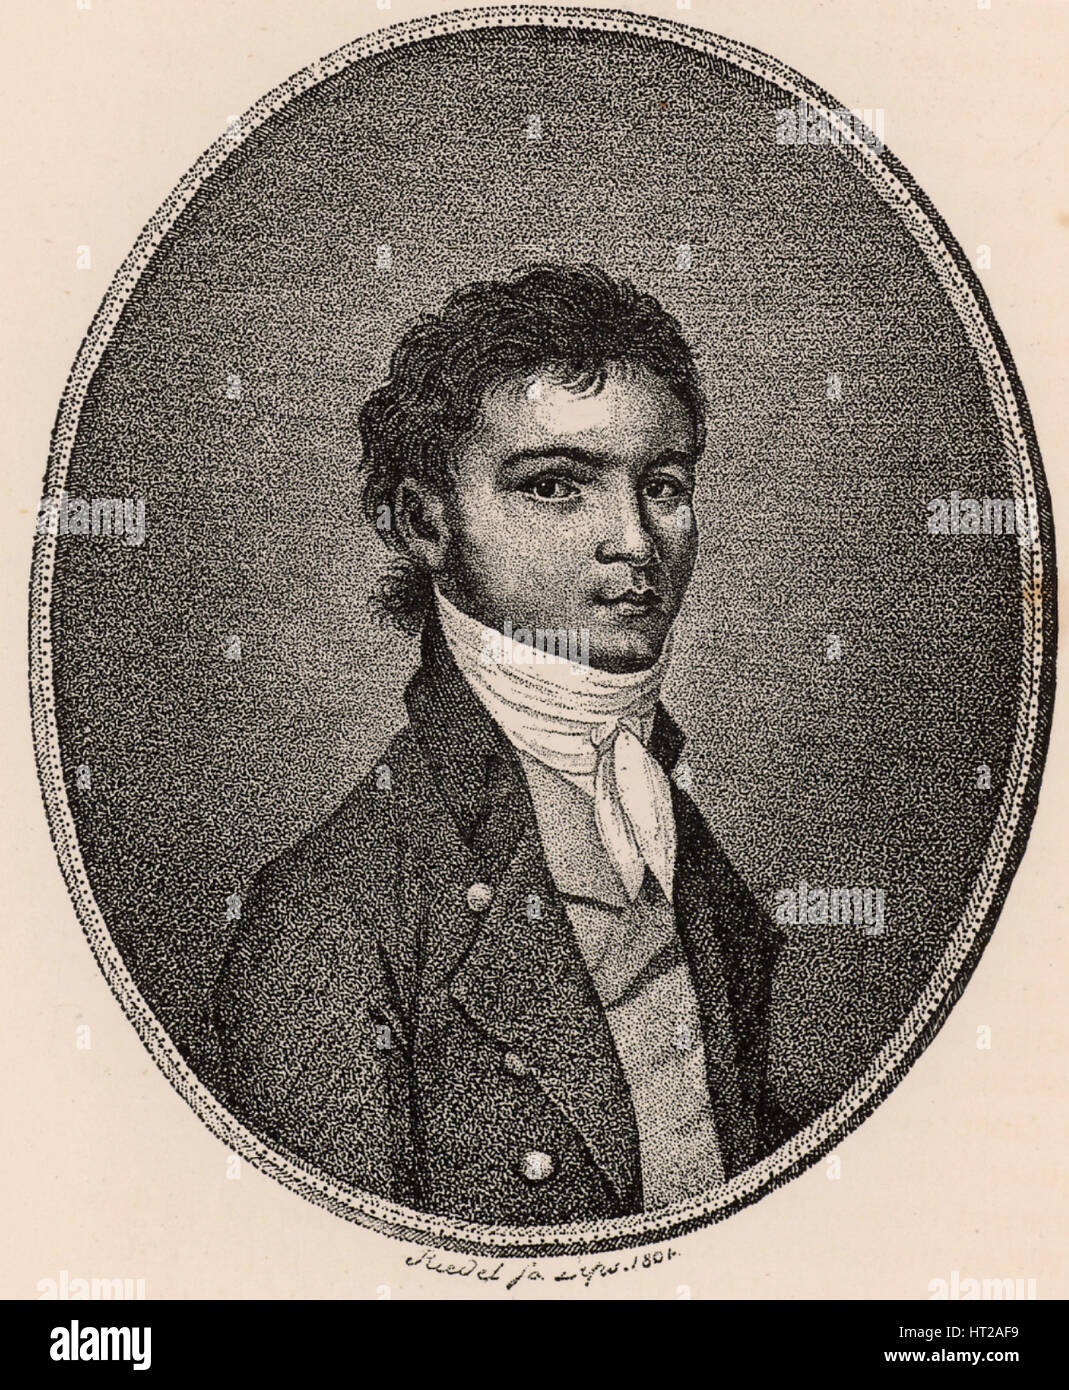 Ludwig van Beethoven (1770-1827), années 1790. Artiste : Anonyme Banque D'Images